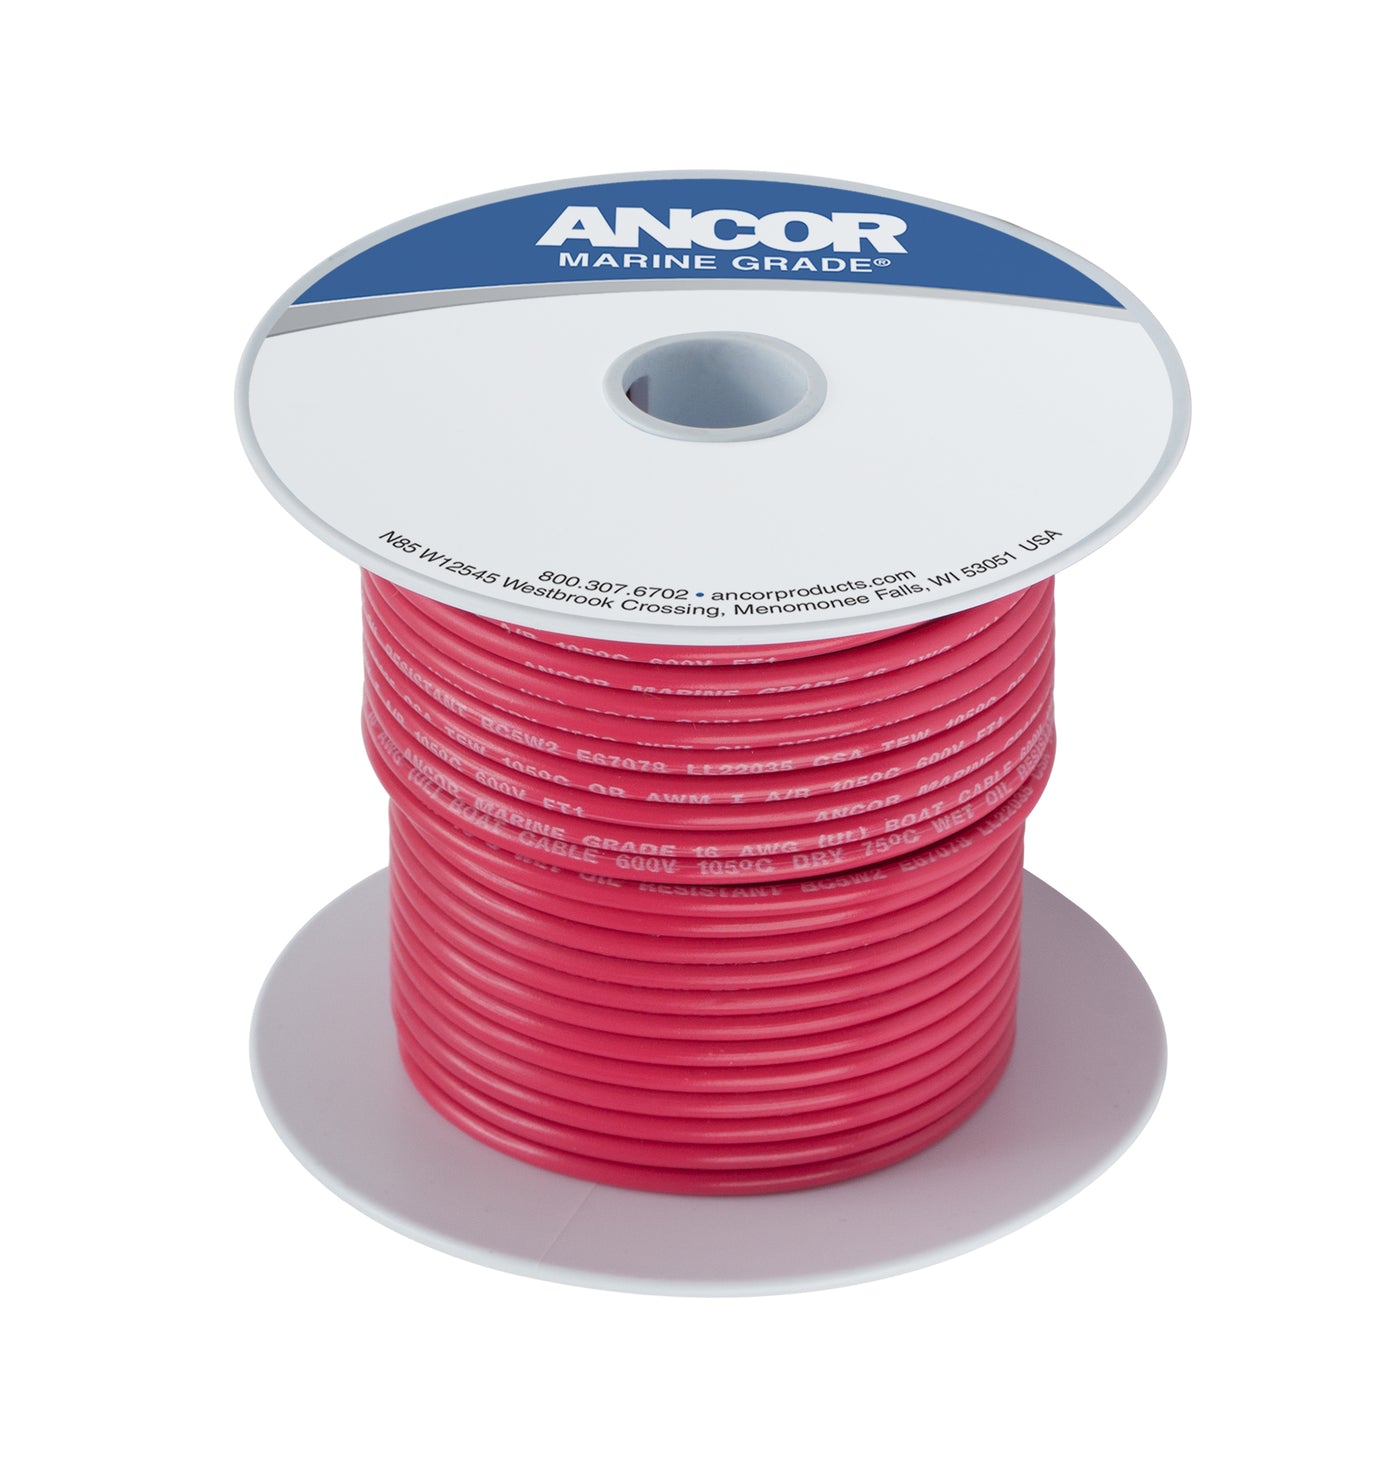 Ancor 112550 Tinned Copper Wire, 6 AWG (13mm²), Red - 500ft